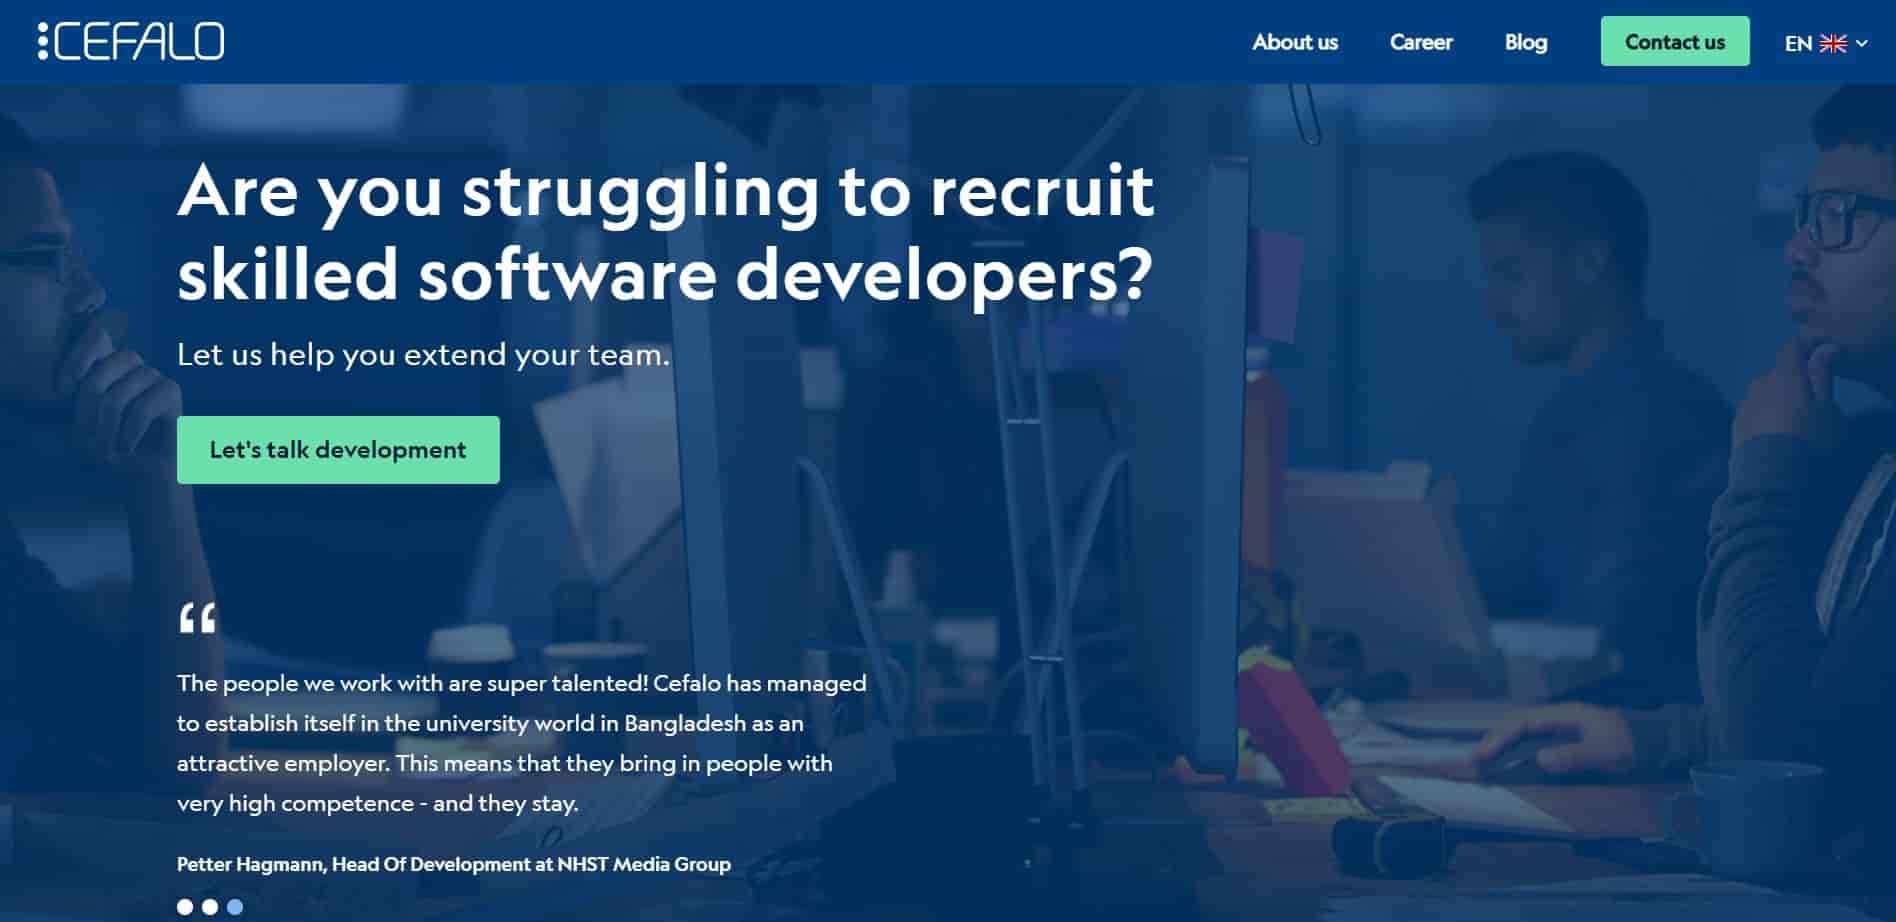 Cefalo homepage and a blurb about how this software company can help other businesses in software development is mentioned.